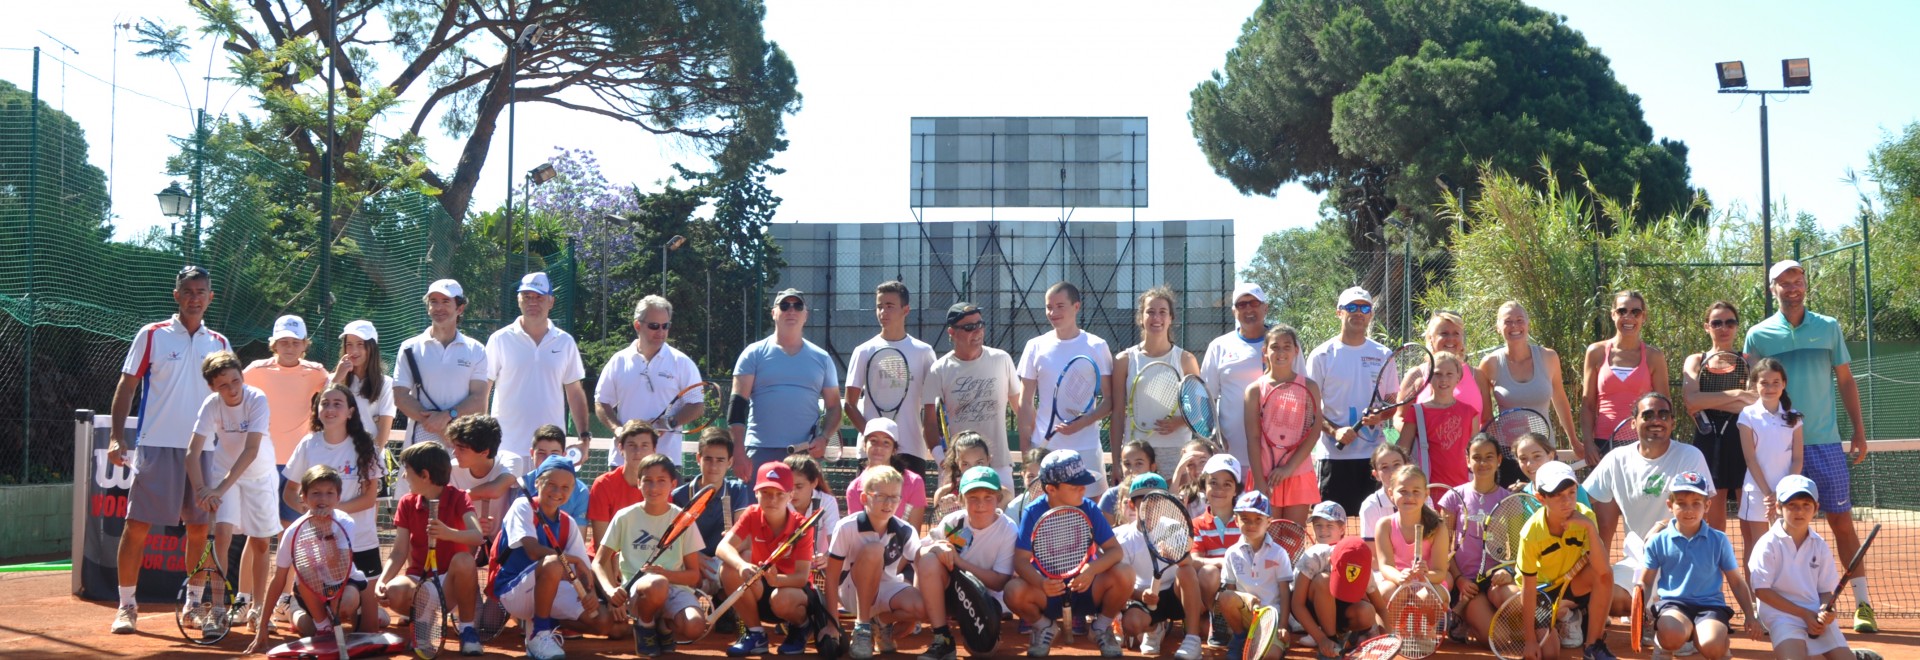 Accommodation and Court Hire Package - Royal Tennis Club Marbella